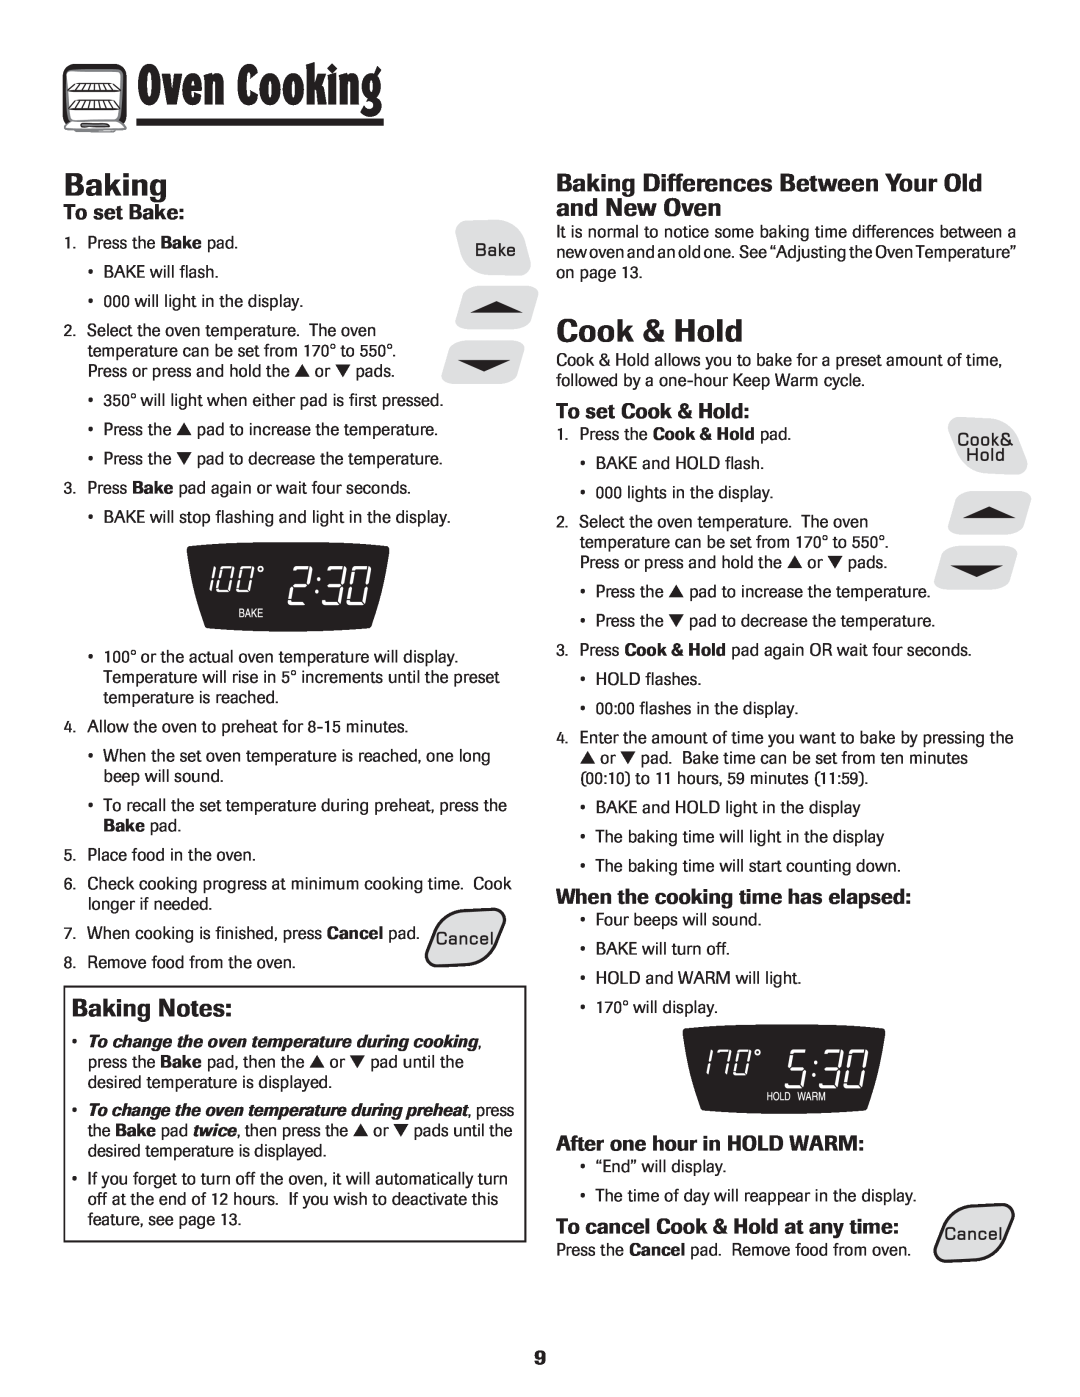 Amana 8113P598-60 manual Cook & Hold, Baking Differences Between Your Old and New Oven, Baking Notes, To set Bake 